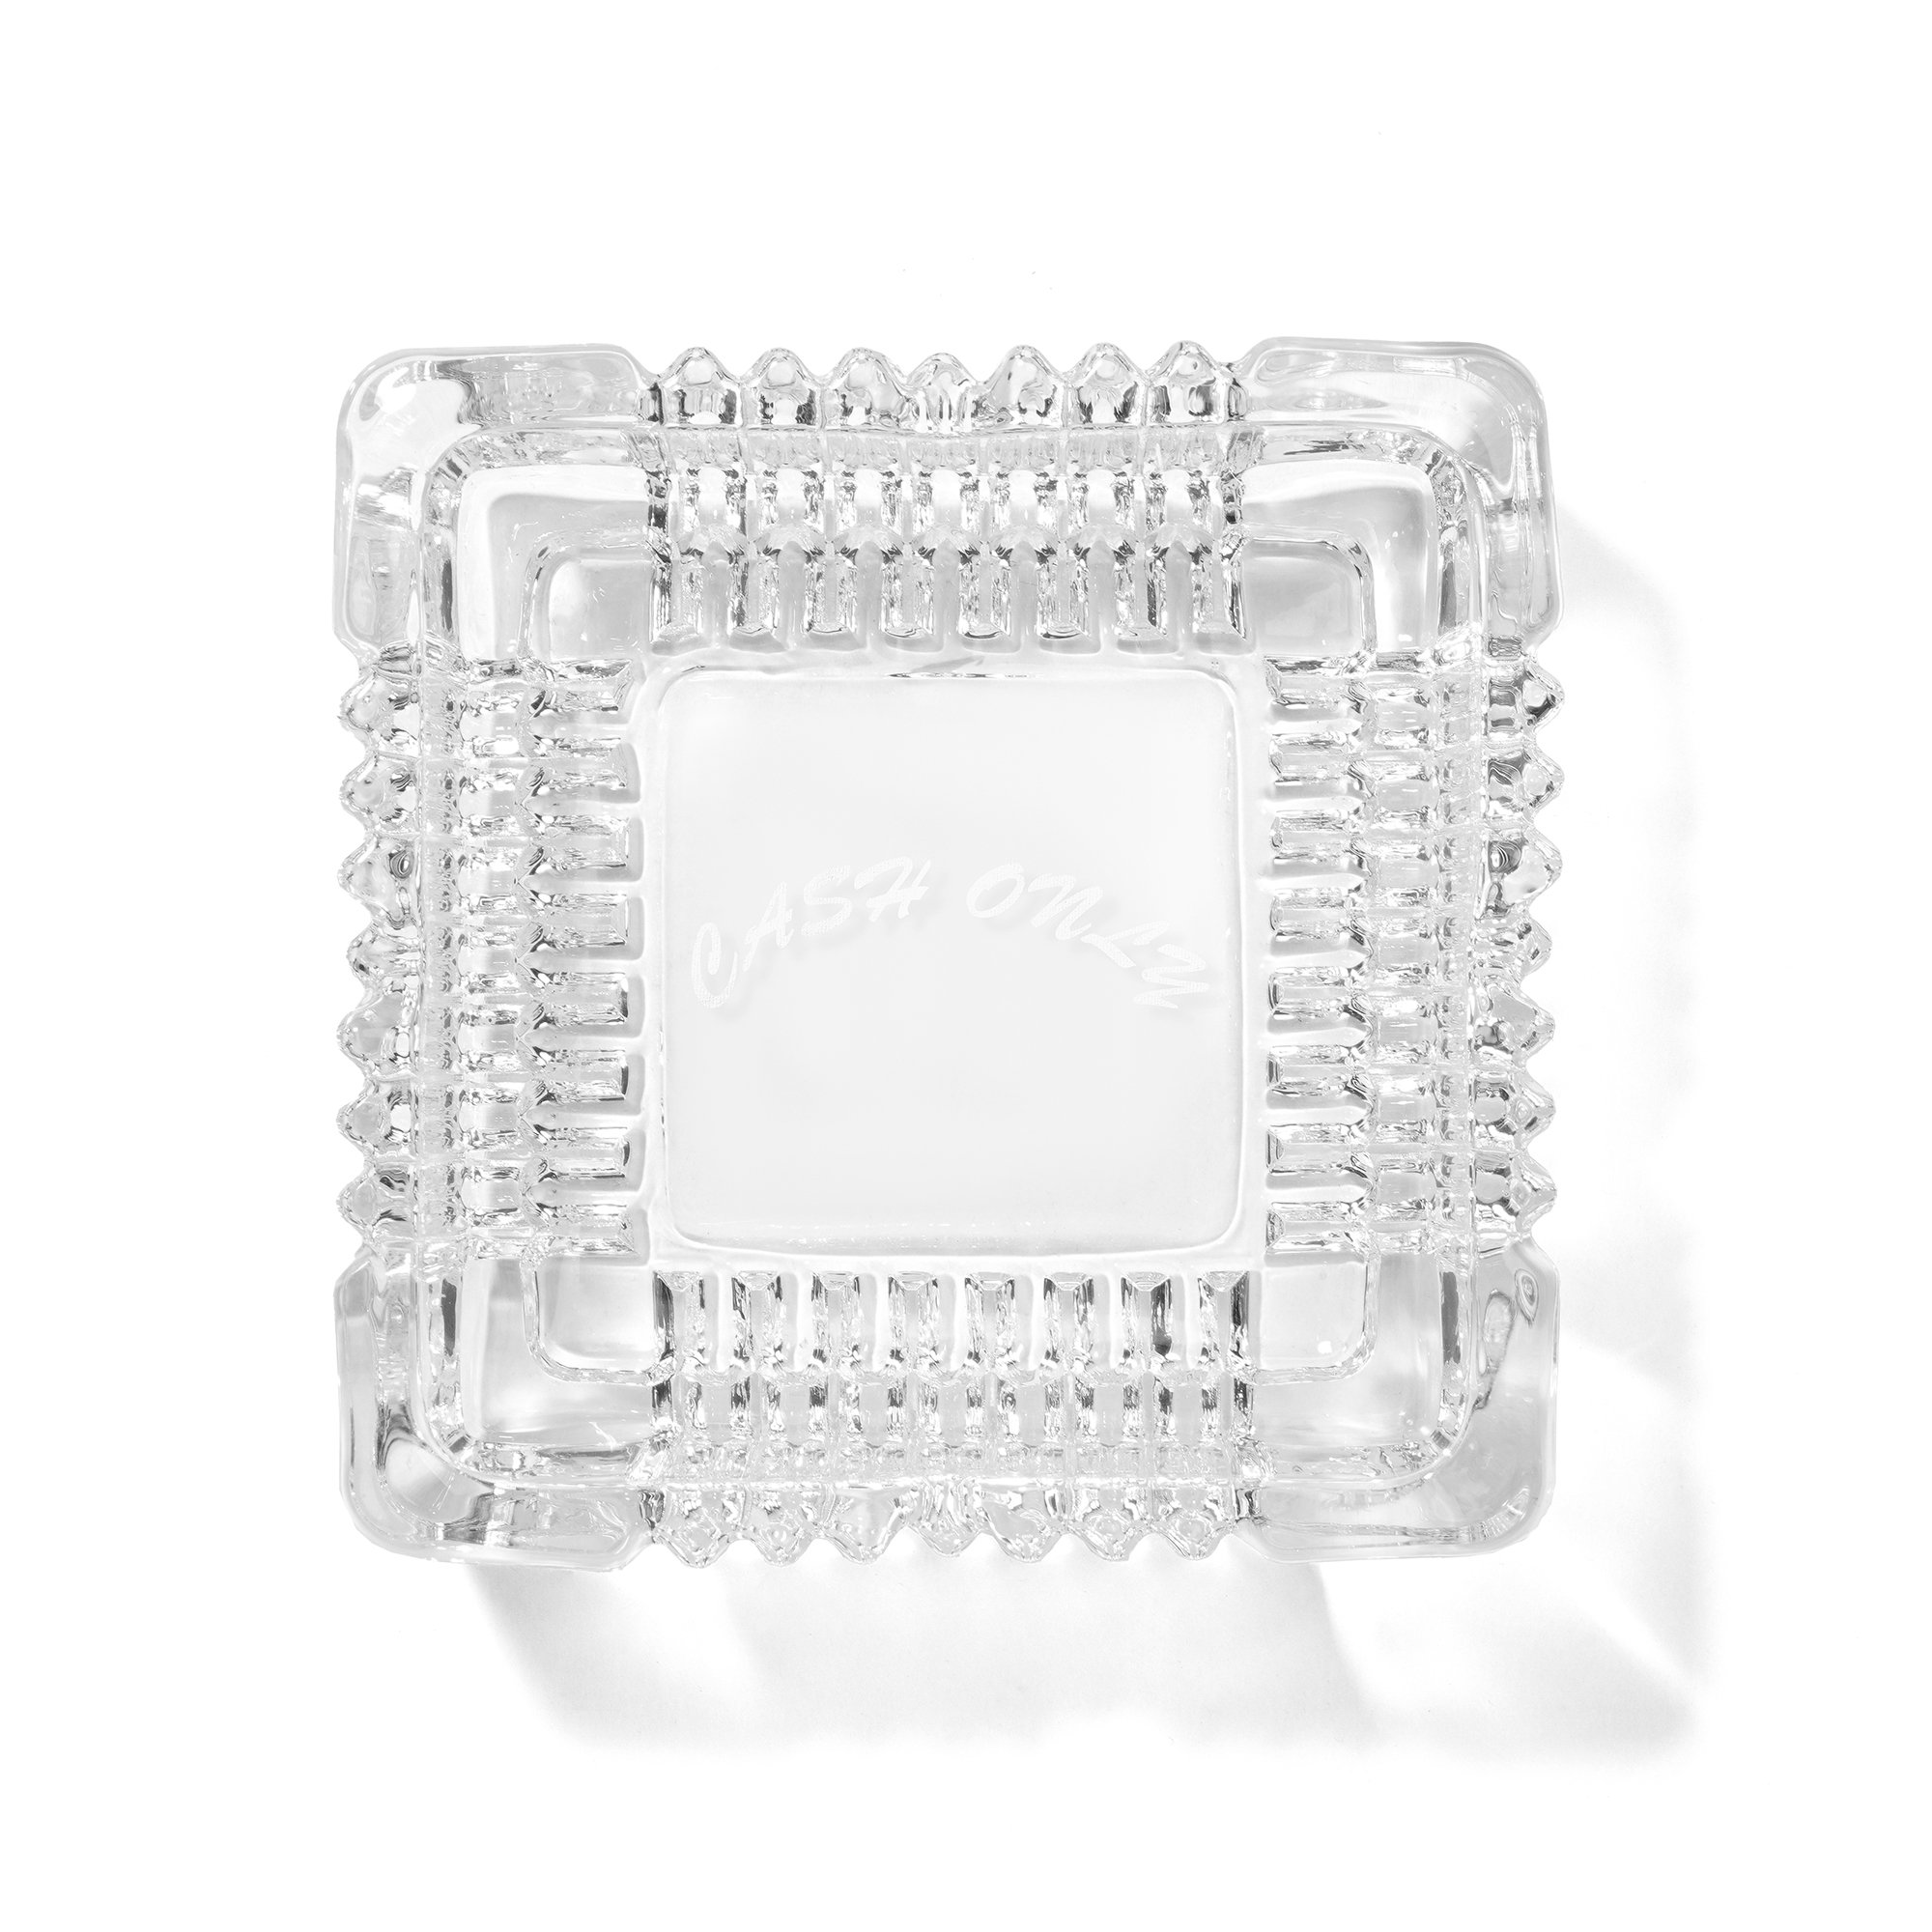 Cash Only<br>Crystal Ashtray<br>